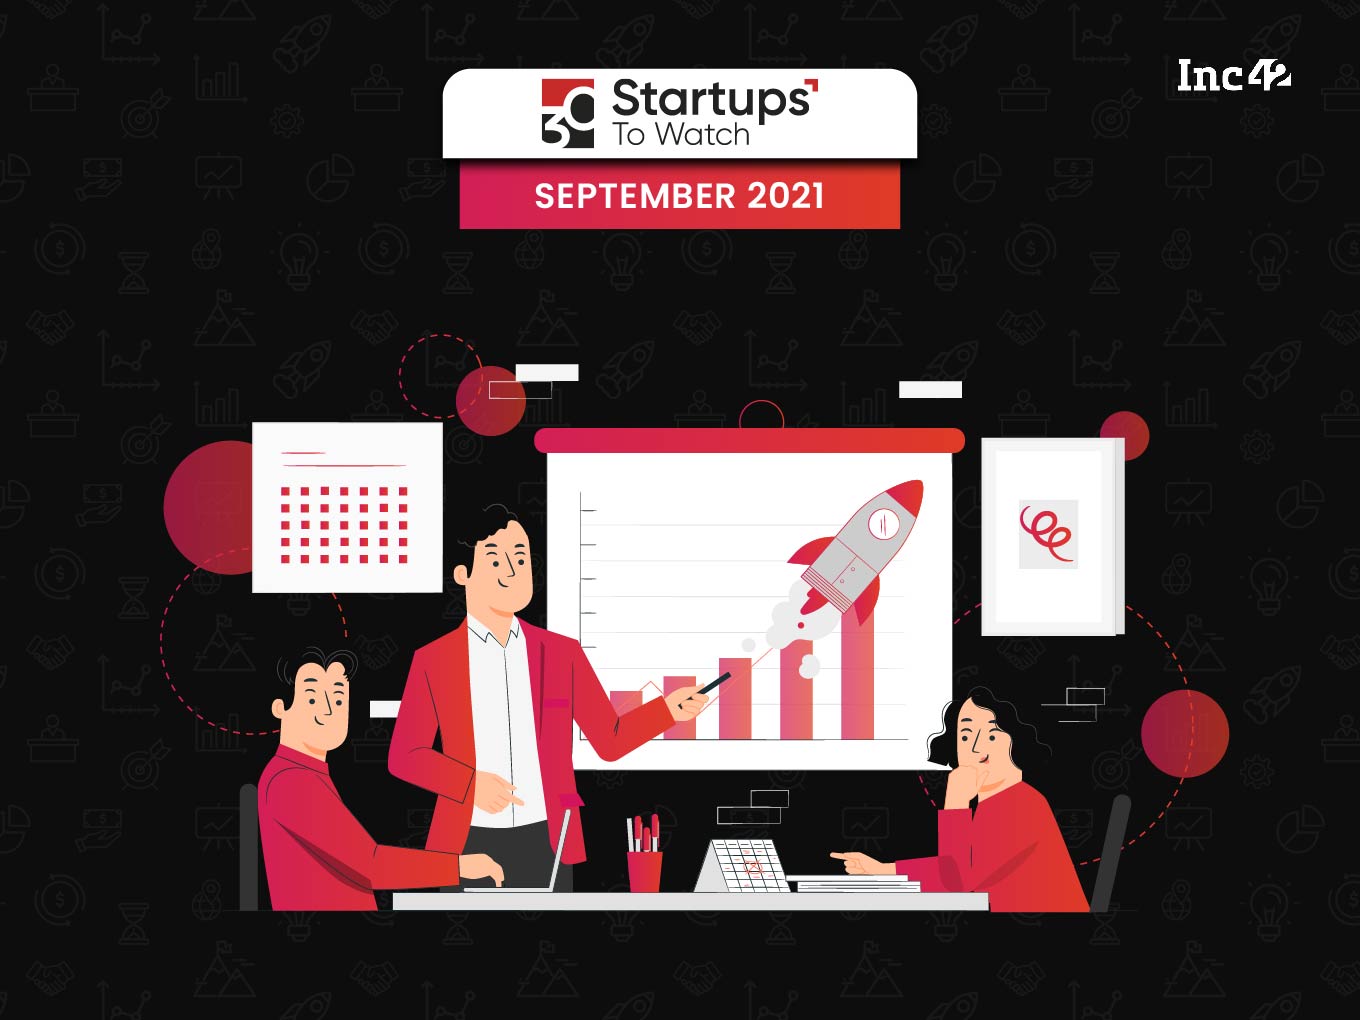 30 Startups To Watch: The Startups That Caught Our Eye In September 2021